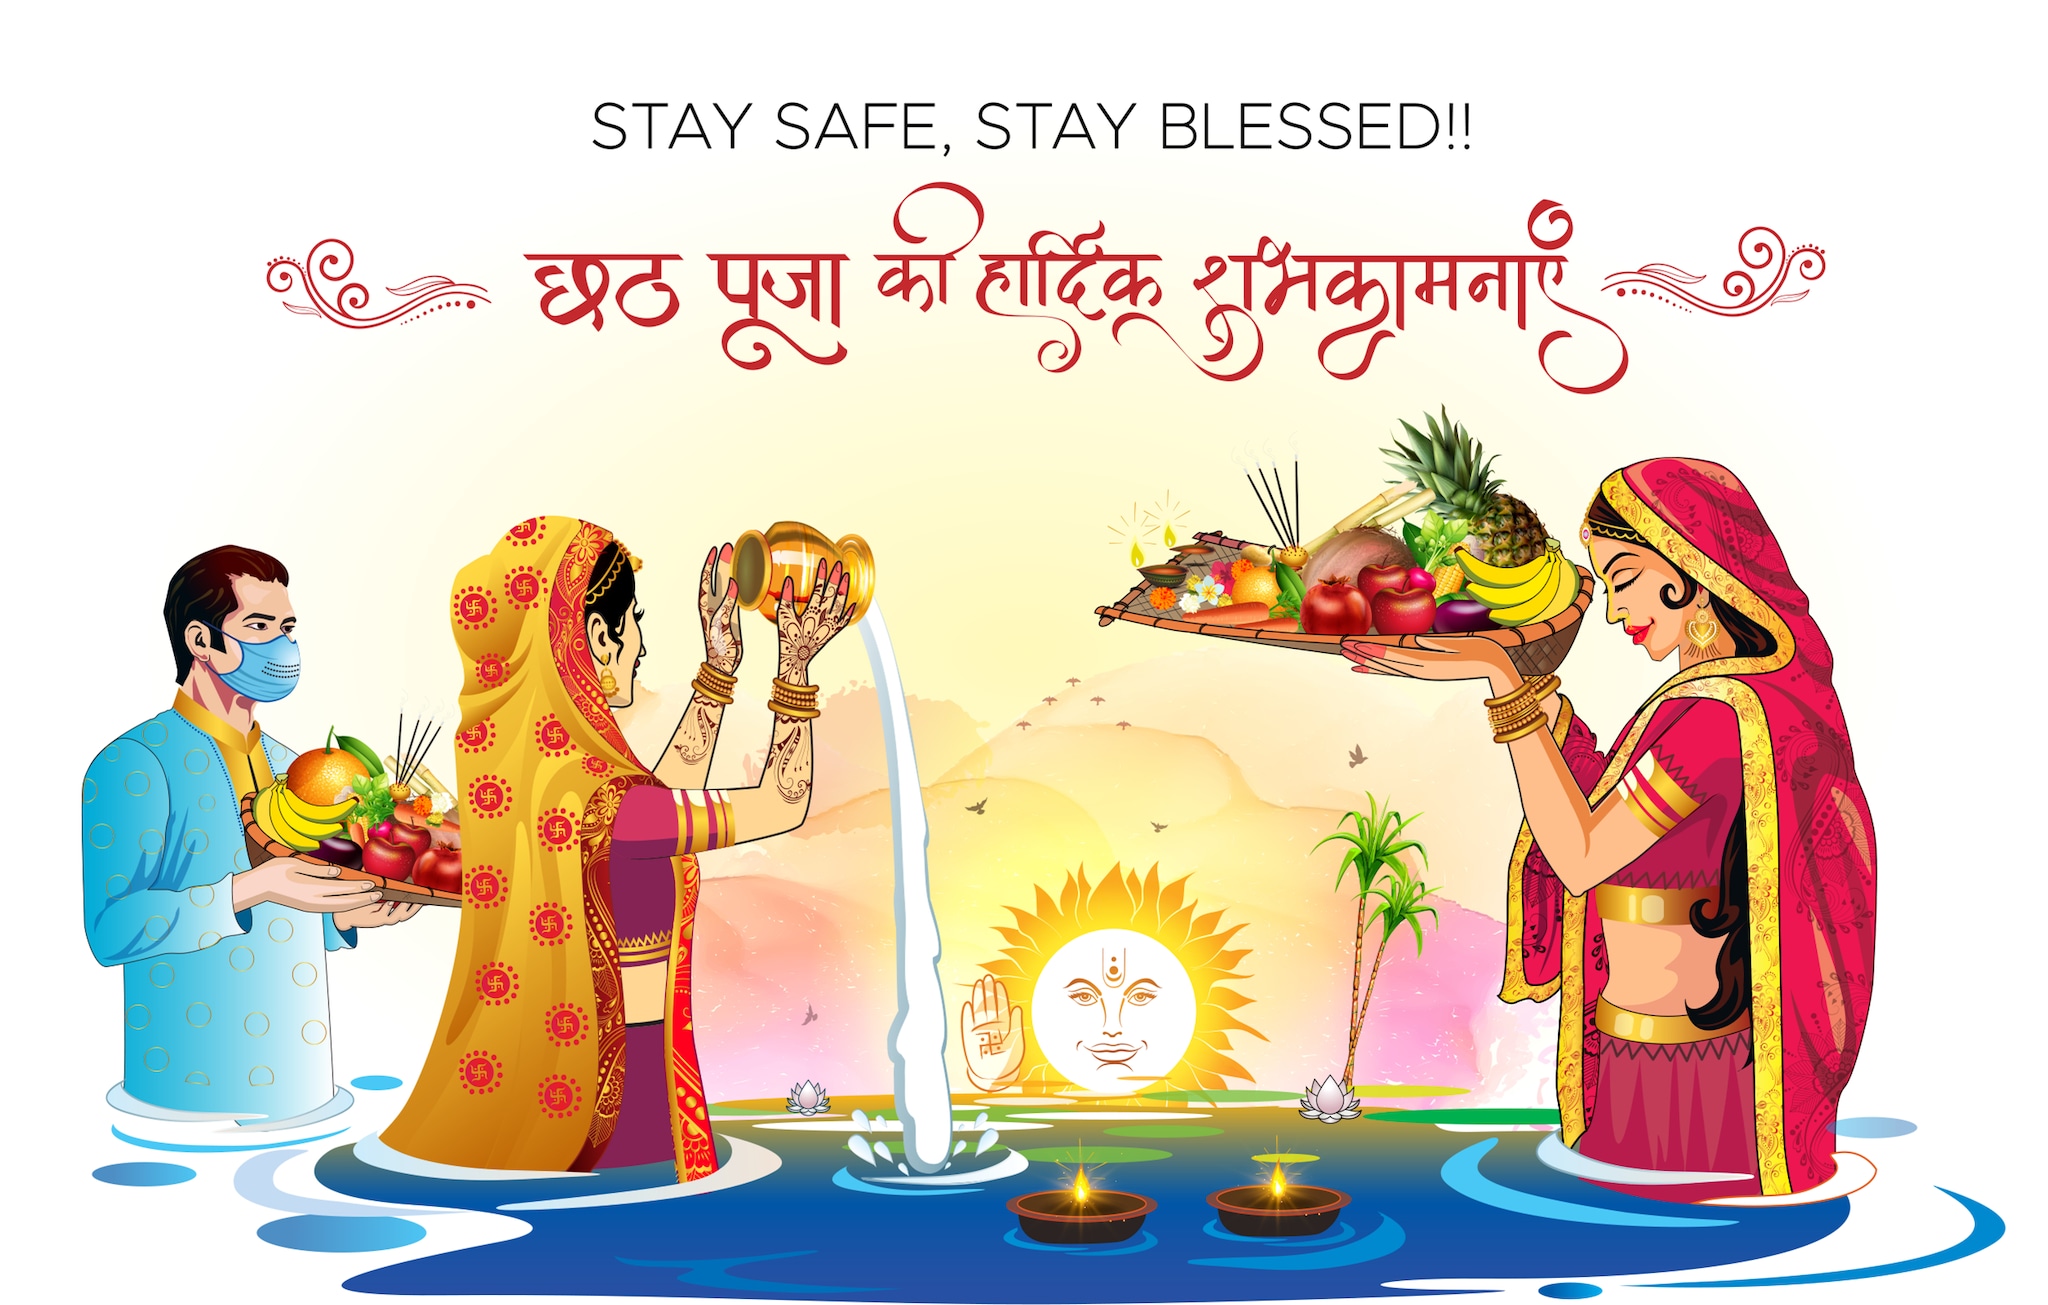 Chhath Puja 2022 Wishes, Greetings, Whatsapp Status, Images and Quotes that you can share with your loved ones.  (Image: Shutterstock) 